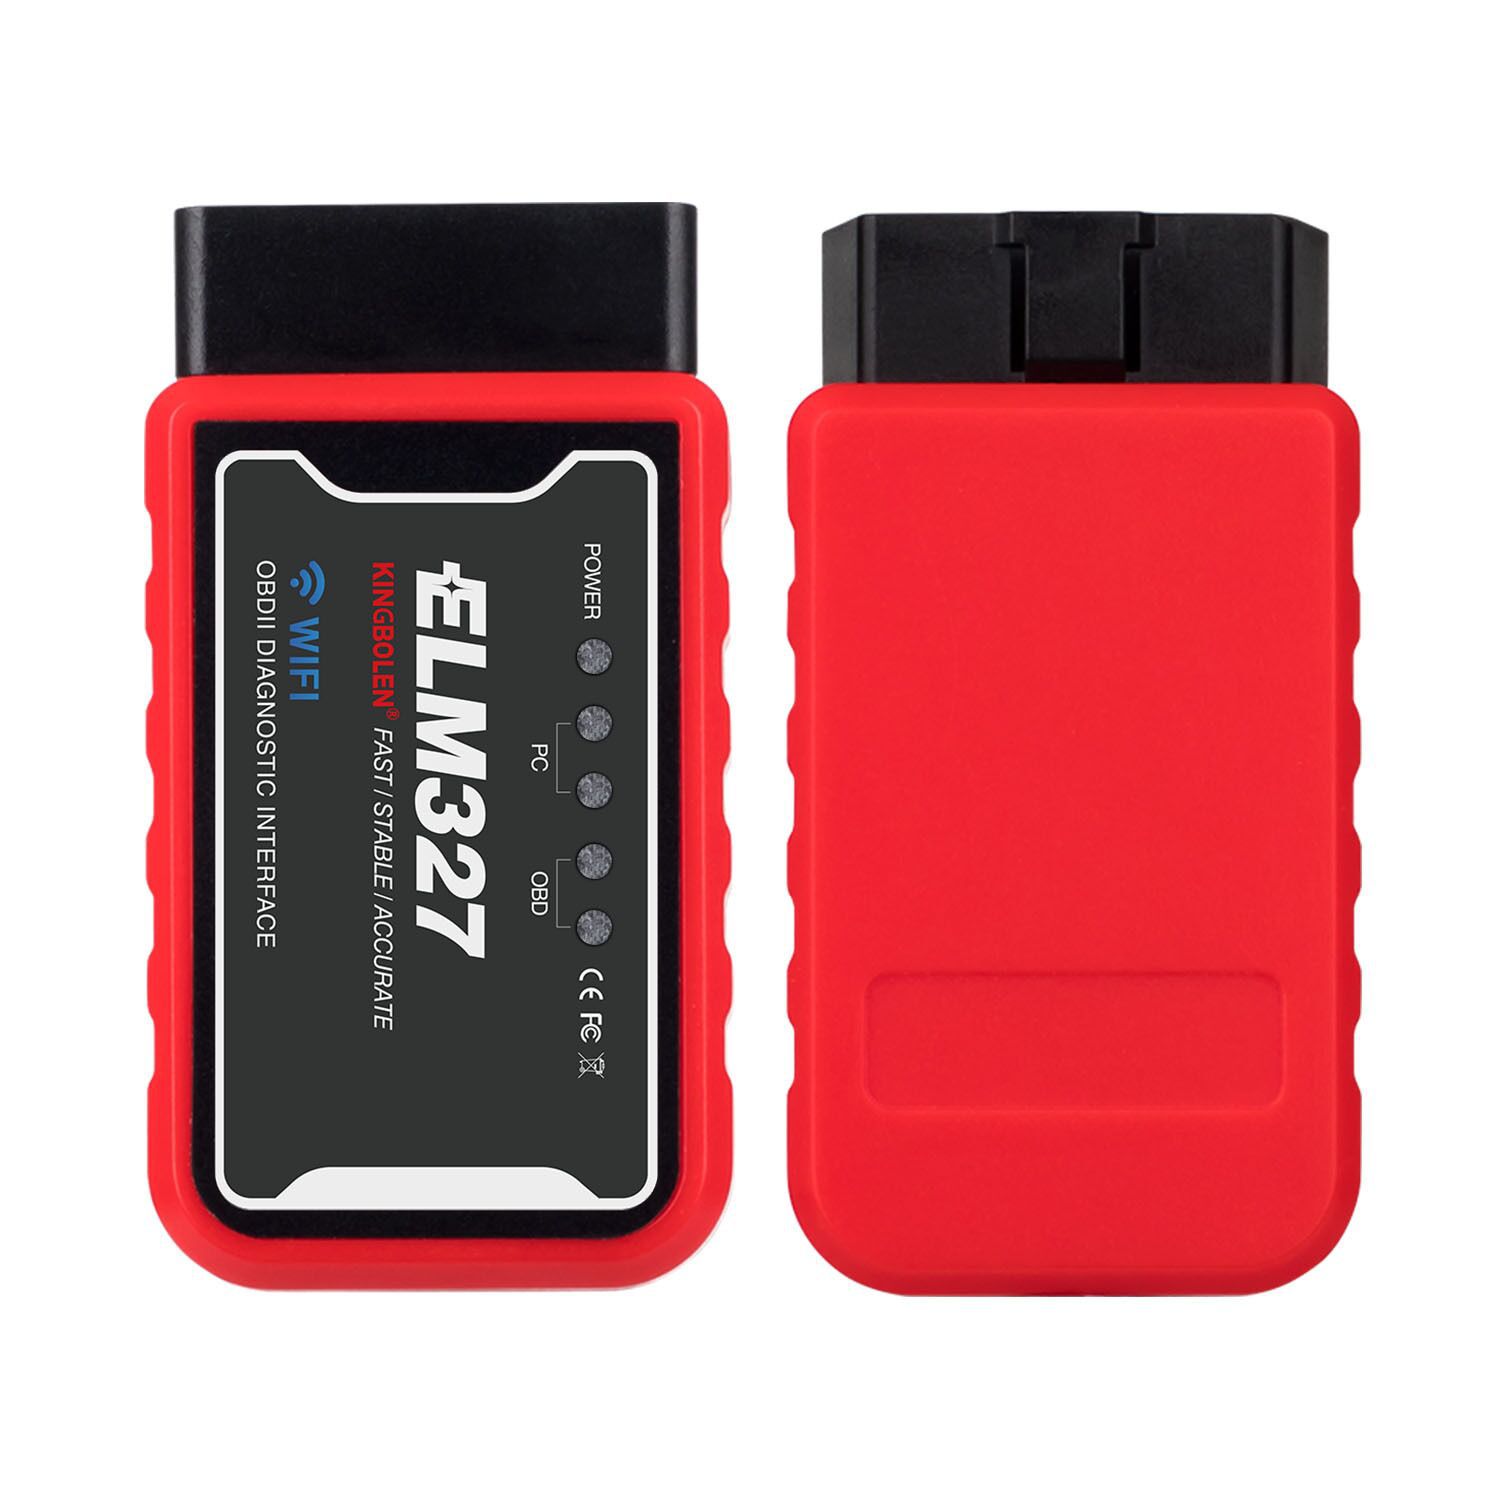 ELM327 WiFi OBD2 OBDII Car Diagnostic Scanner Code Reader Tool for iOS&Android A 